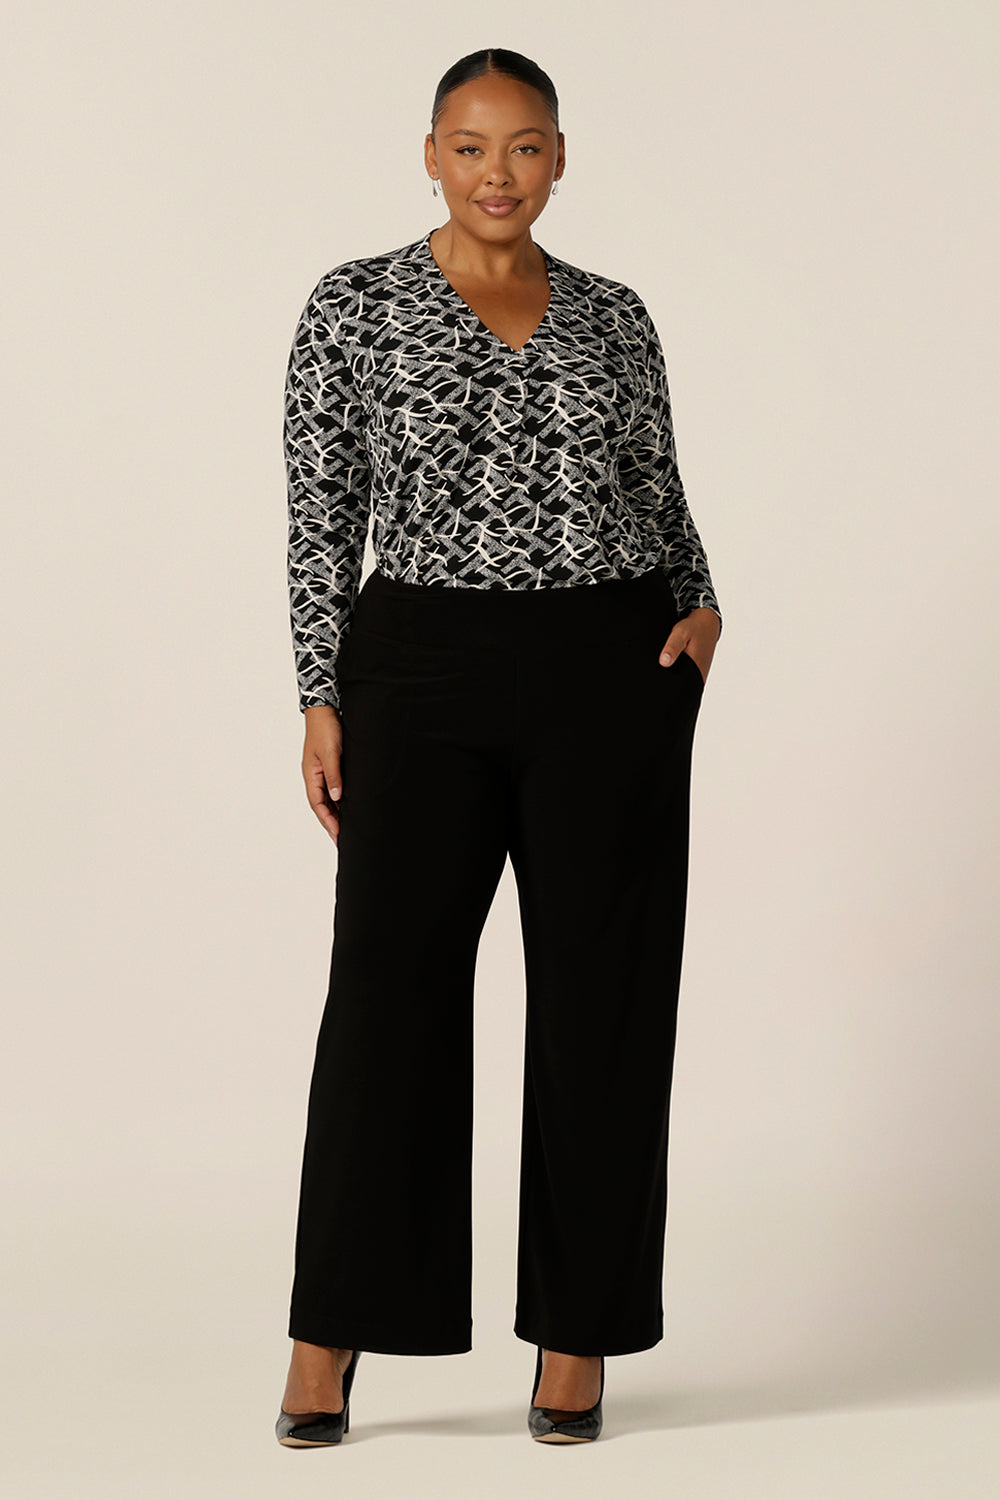 A size 18, plus size woman wears a V-neck jersey top with long sleeves and a shirttail hemline with wide leg black workwear pants. Made in Australia by women's workwear and casual wear brand, L&F, this long sleeve top features a black and white graphic print.